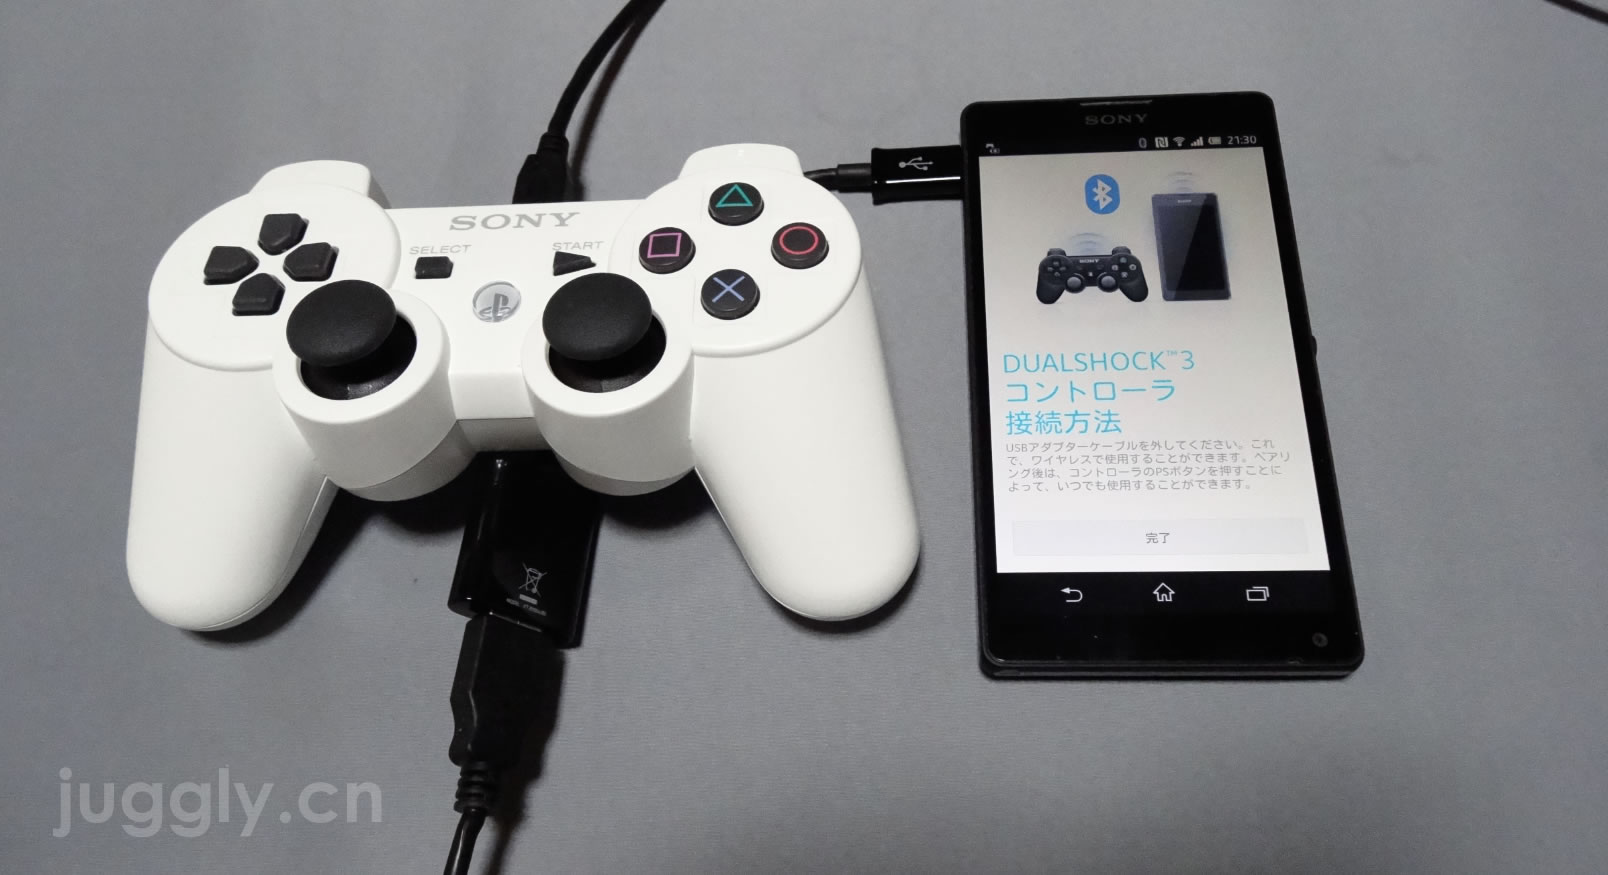 Xperia Zlがandroid 4 2 2へのアップデートでps3用ゲームコントローラー Dualshock3 に対応 セットアップ手順や使い方を紹介 Juggly Cn